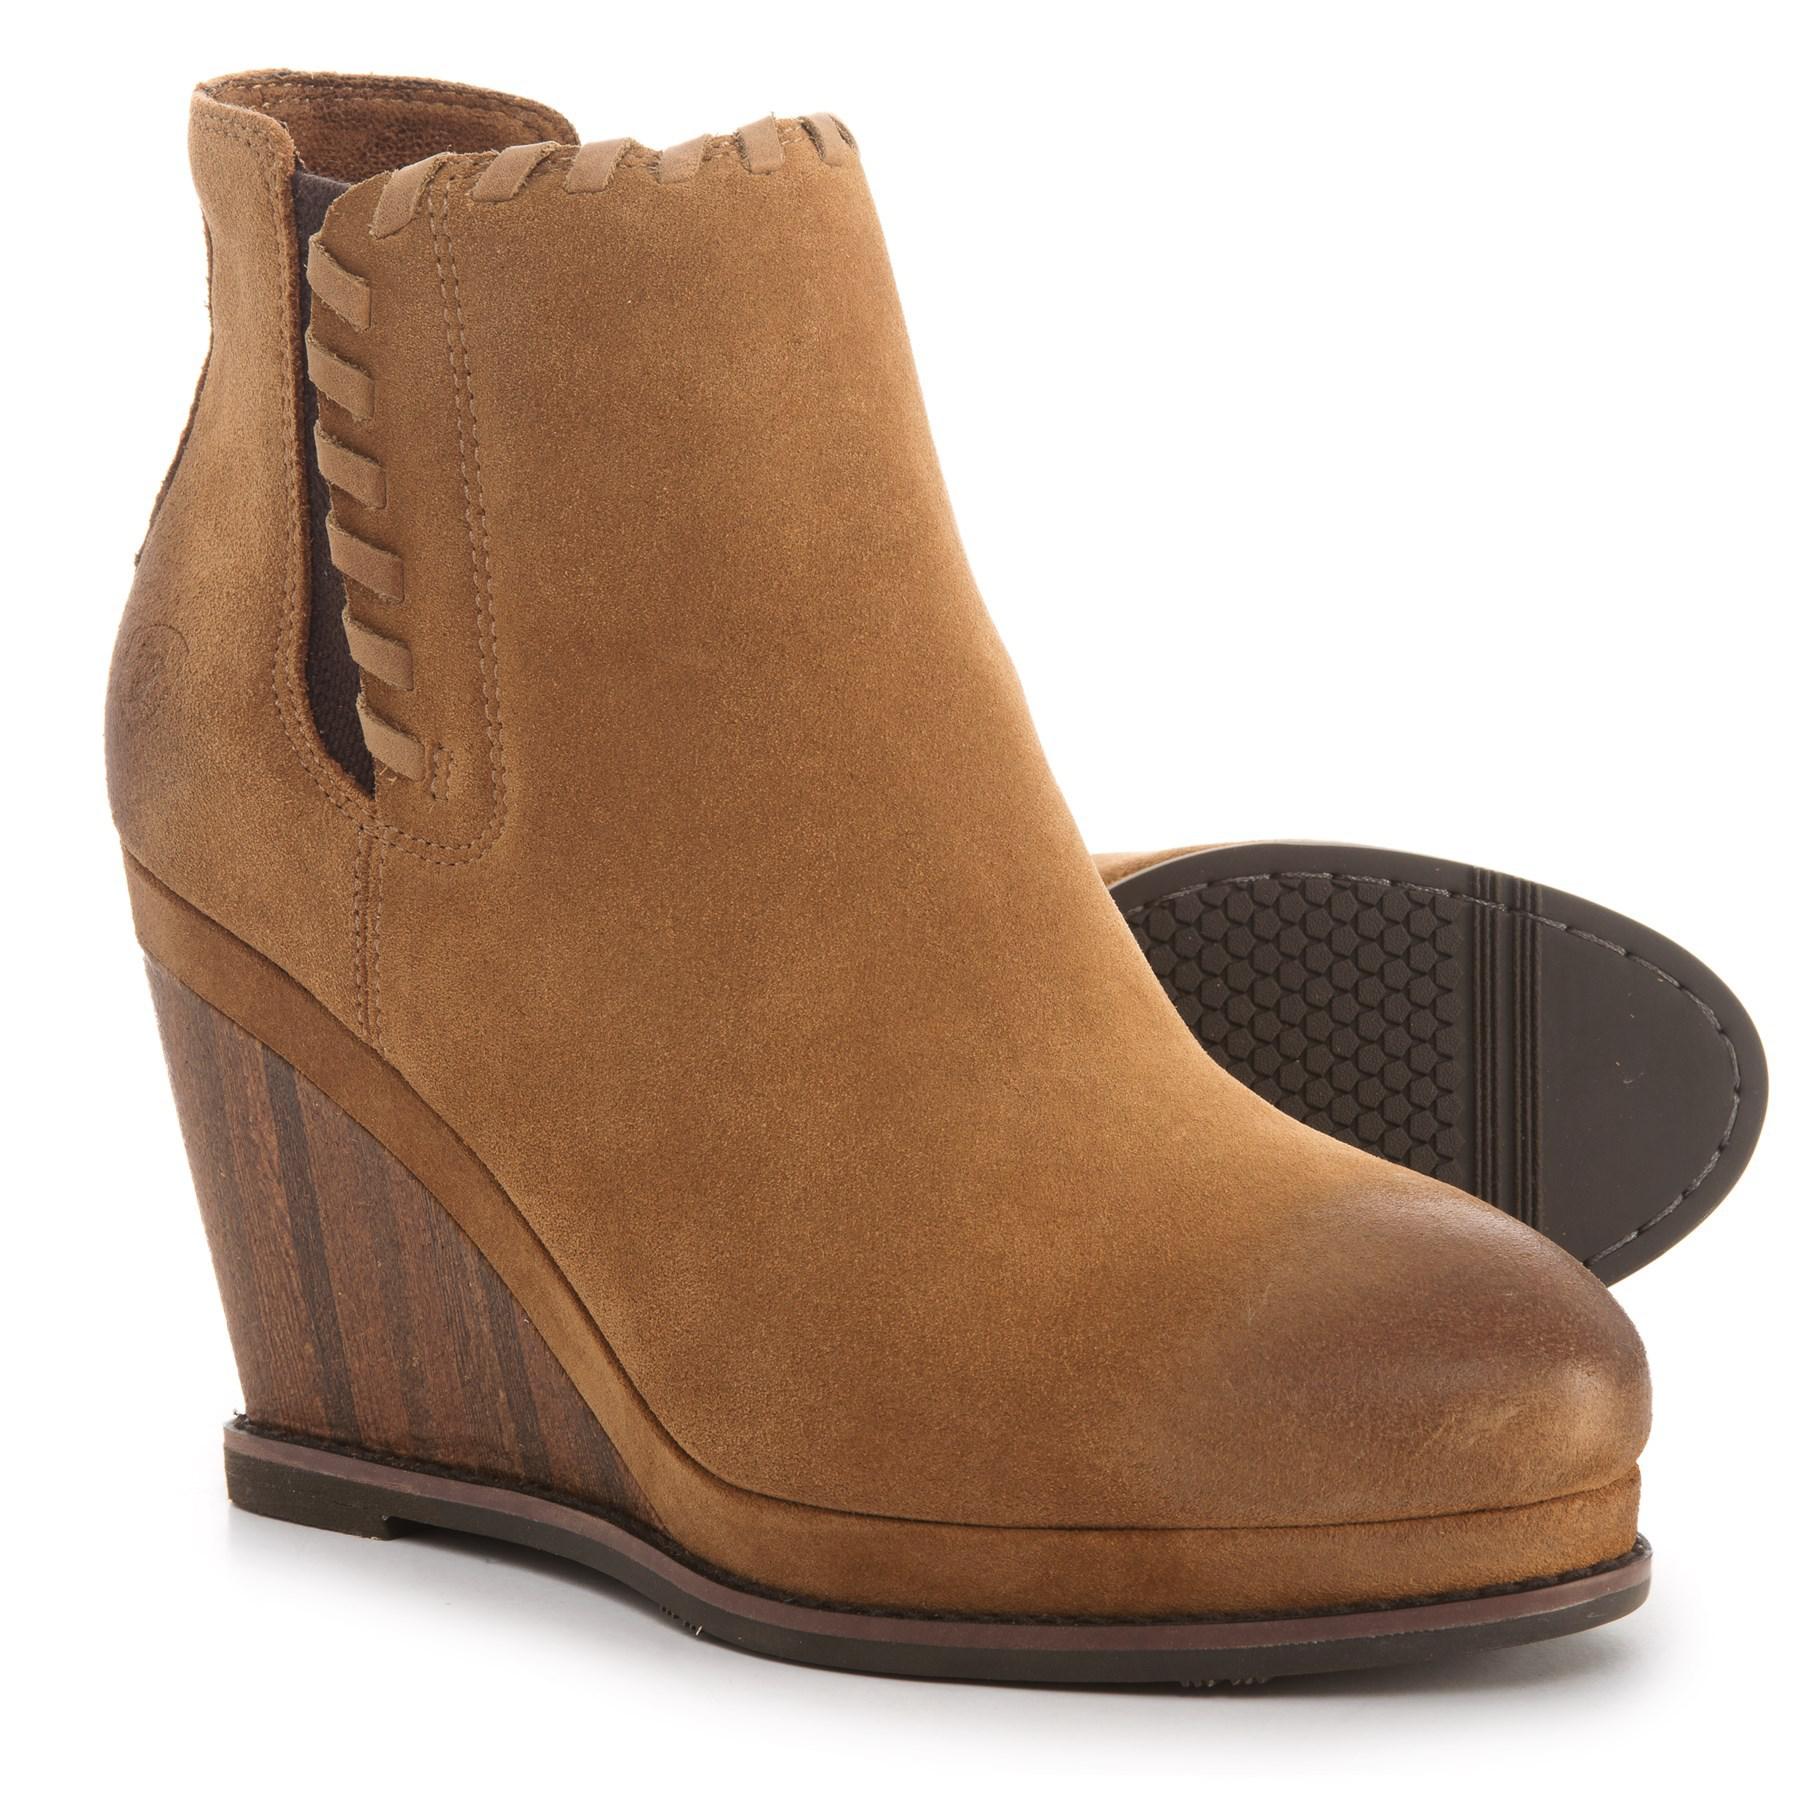 Ariat Belle Wedge Ankle Boots in Brown - Lyst